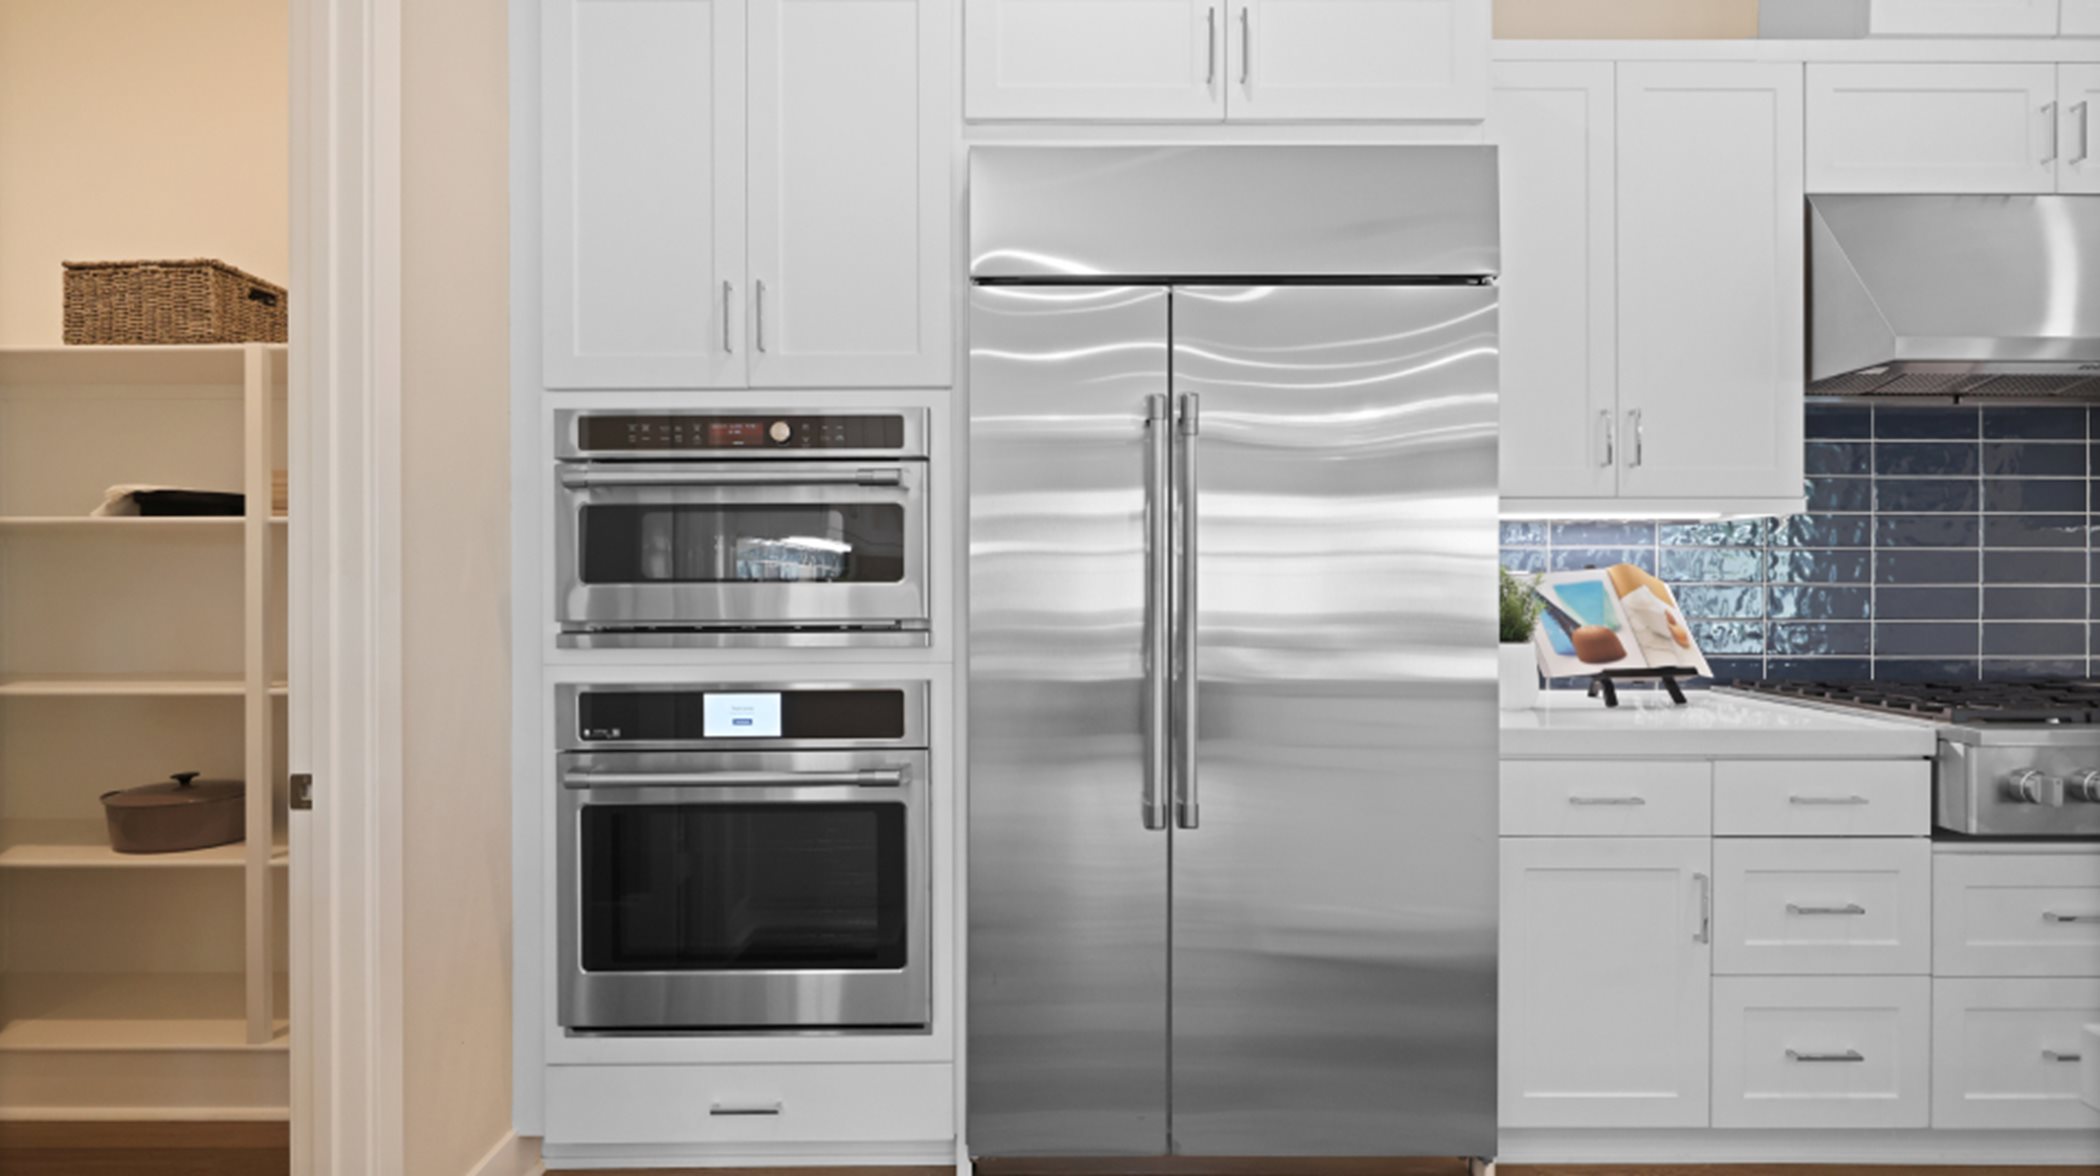 Fridge and in-wall oven